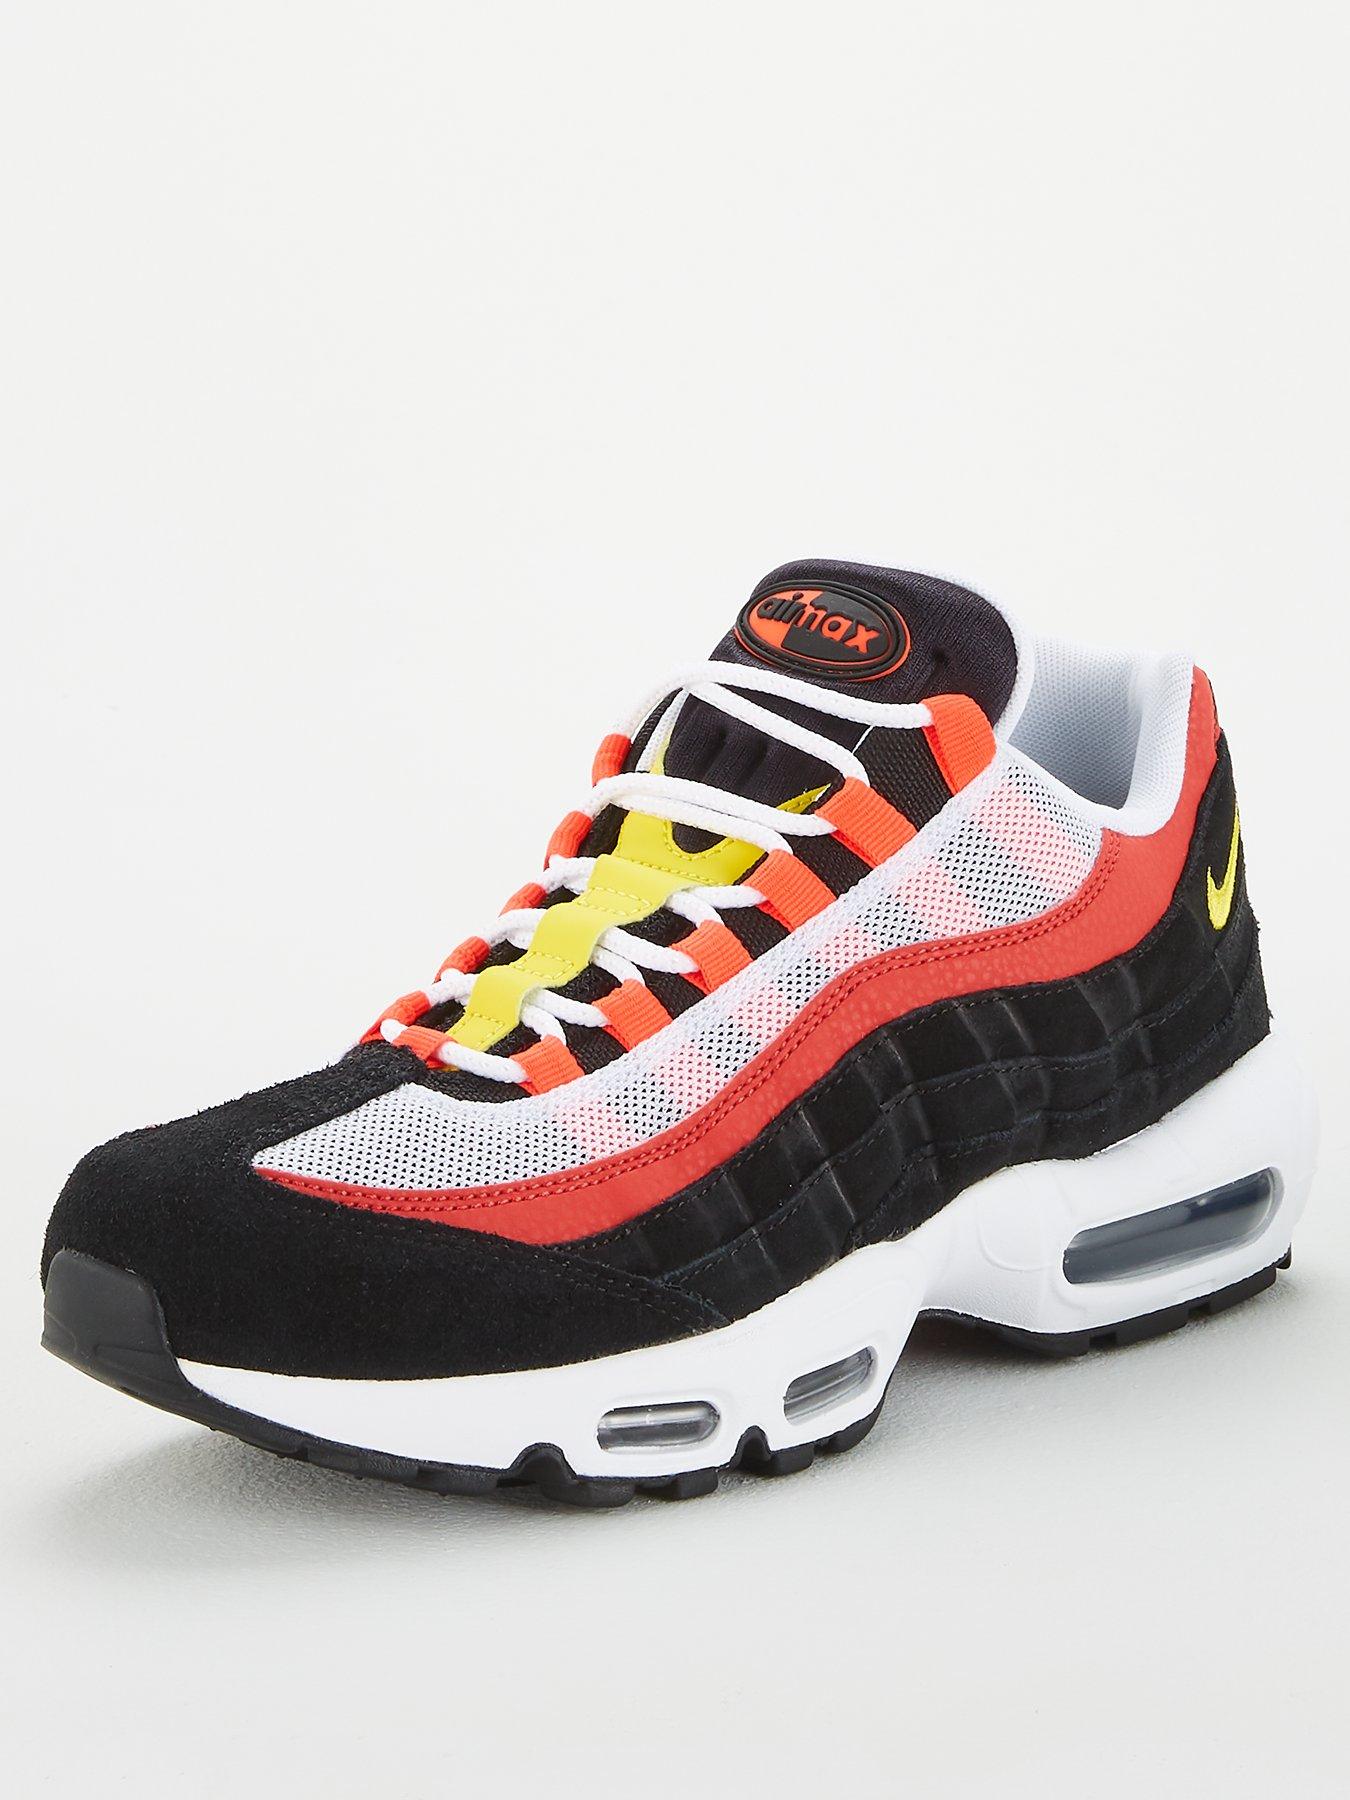 red and black airmax 95